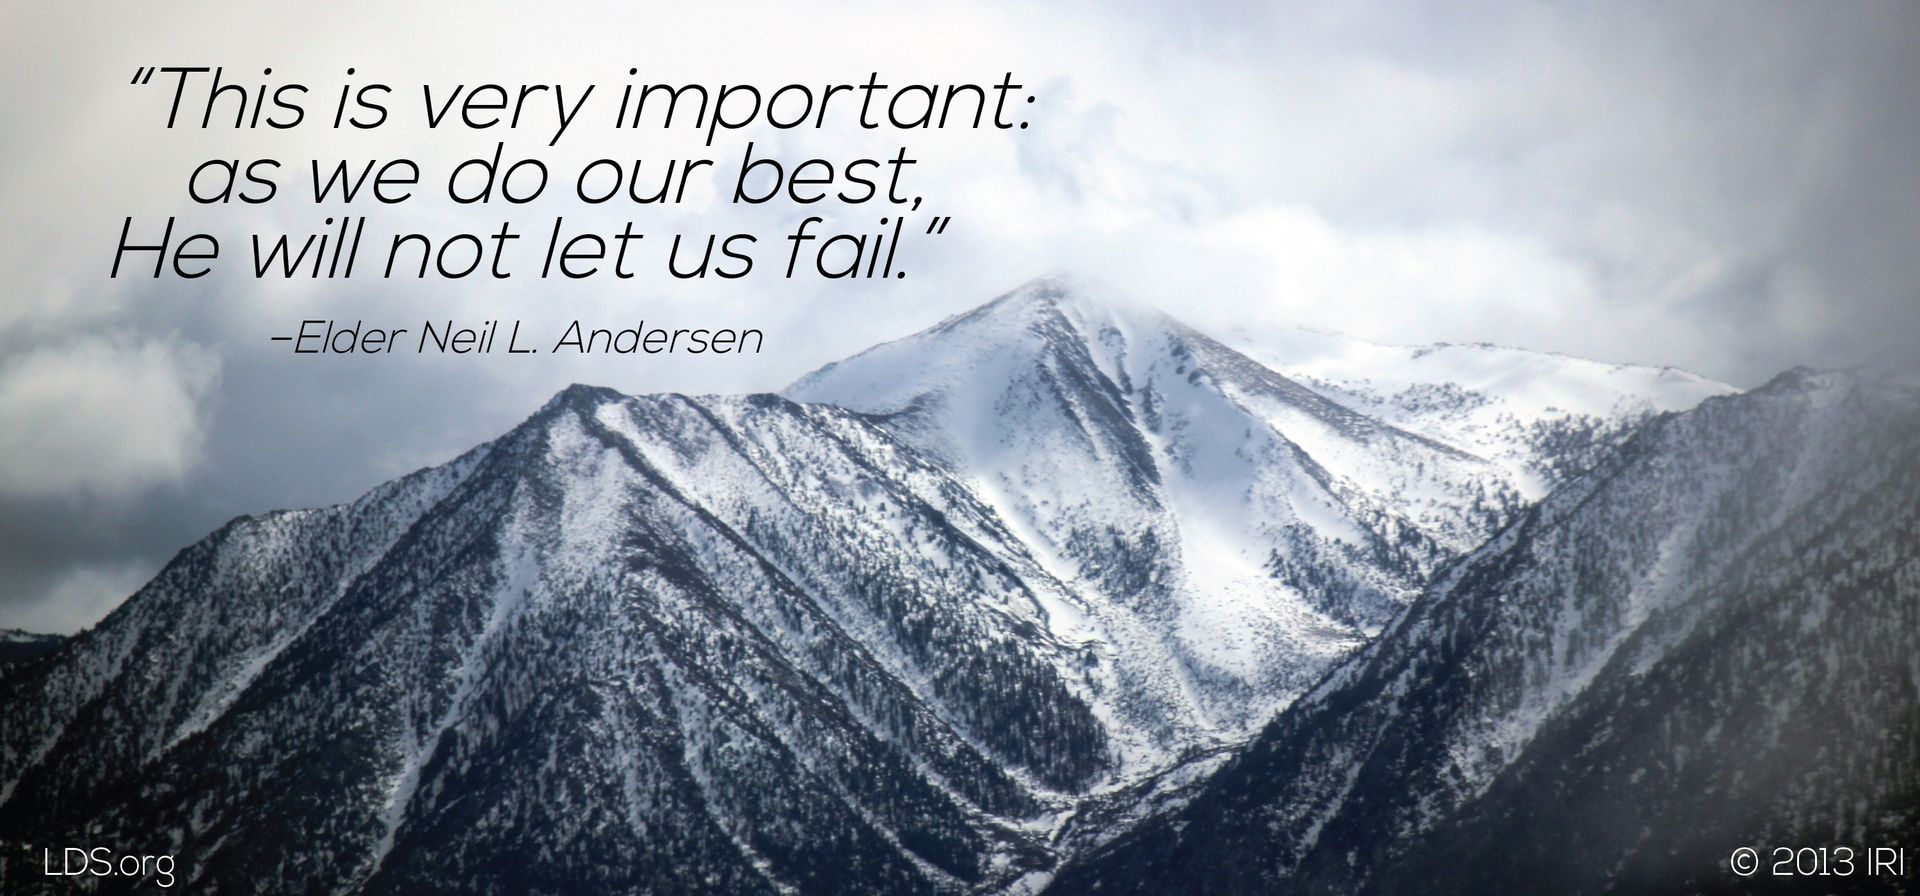 “This is very important: as we do our best, He will not let us fail.”—Elder Neil L. Andersen, “A Spiritual Work” © undefined ipCode 1.